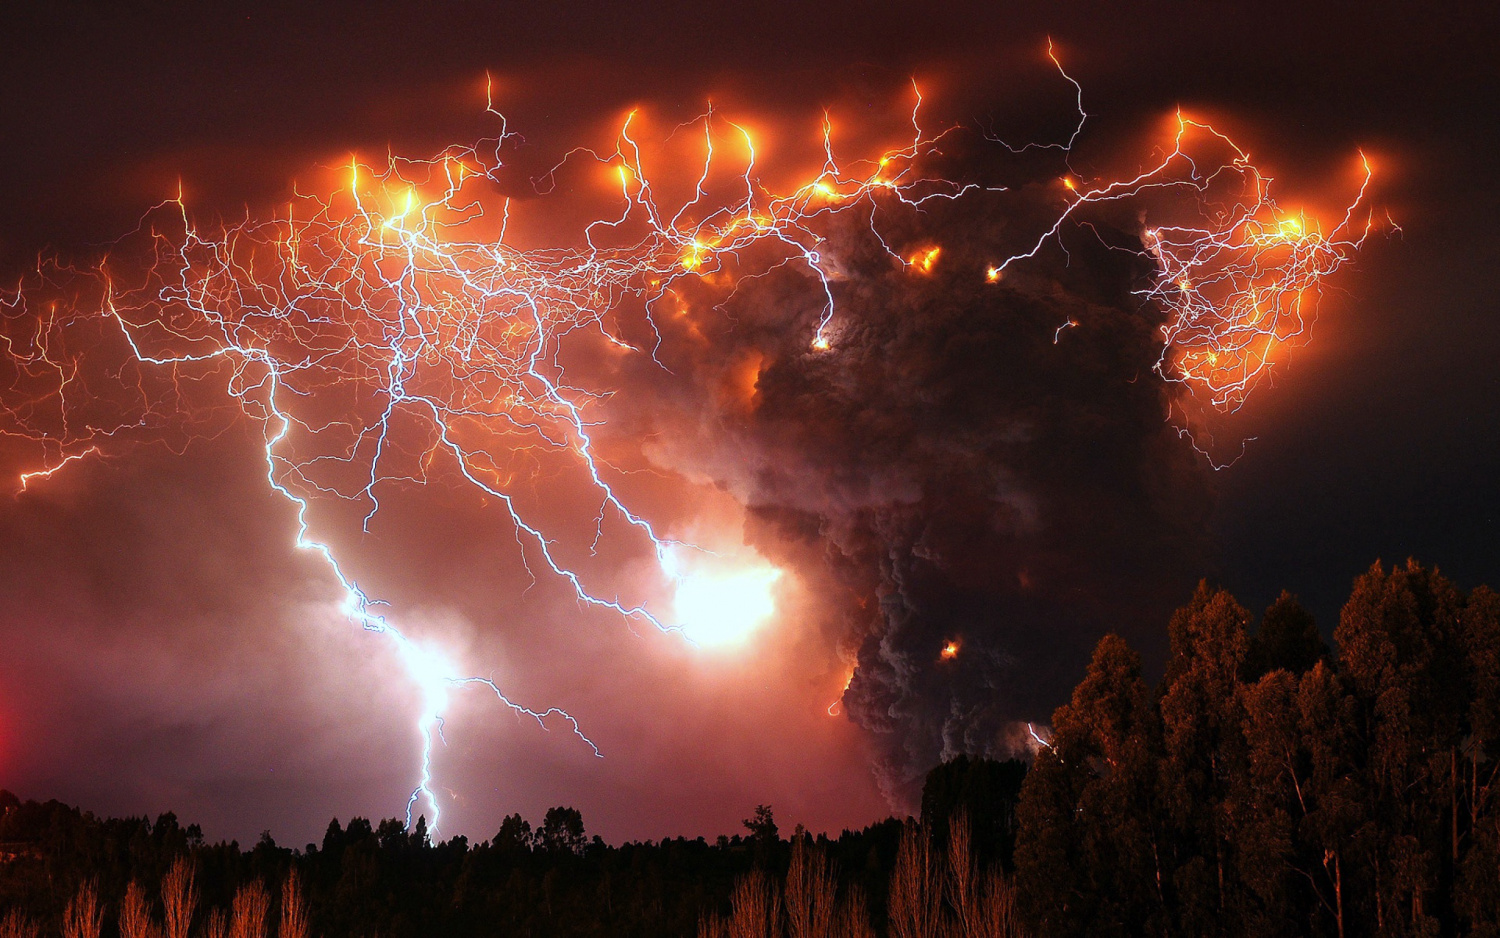 volcano, Eruption, Nature, Chile, Night, Landscape, Lightning, Trees, Forest, Smoke, Sky, Clouds Wallpaper